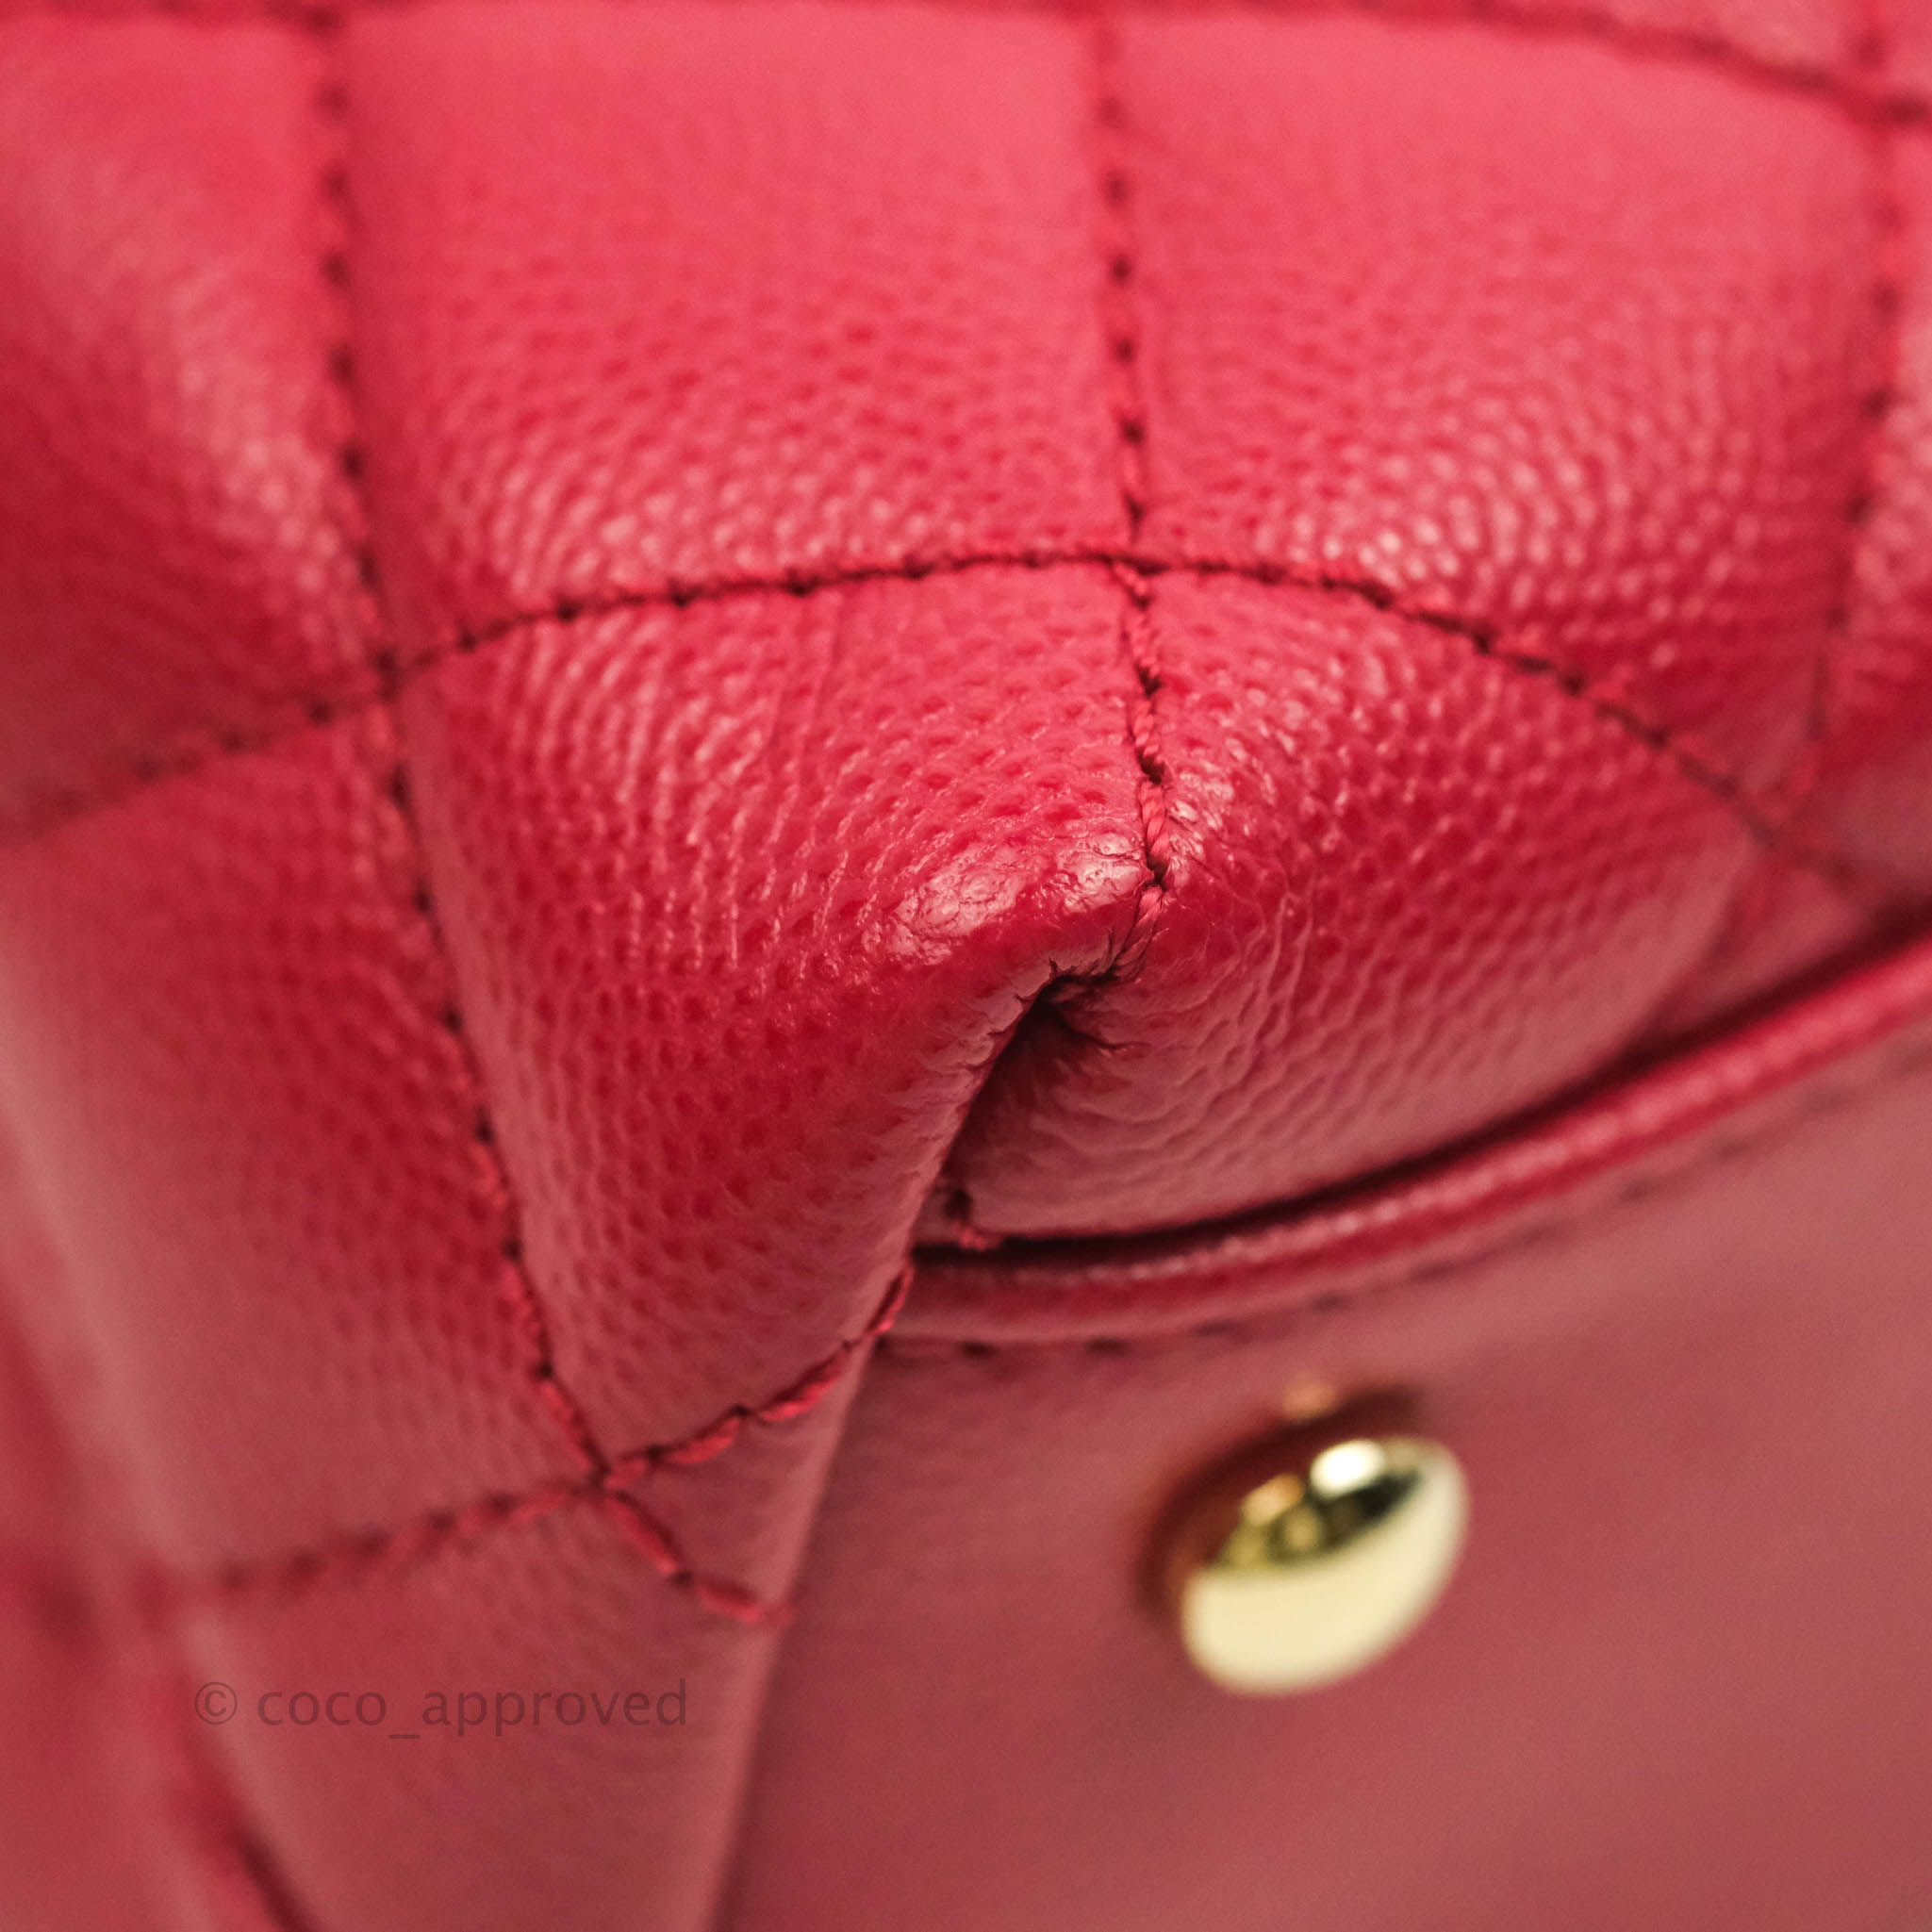 Chanel Red Coco Handle Small Bag – The Closet